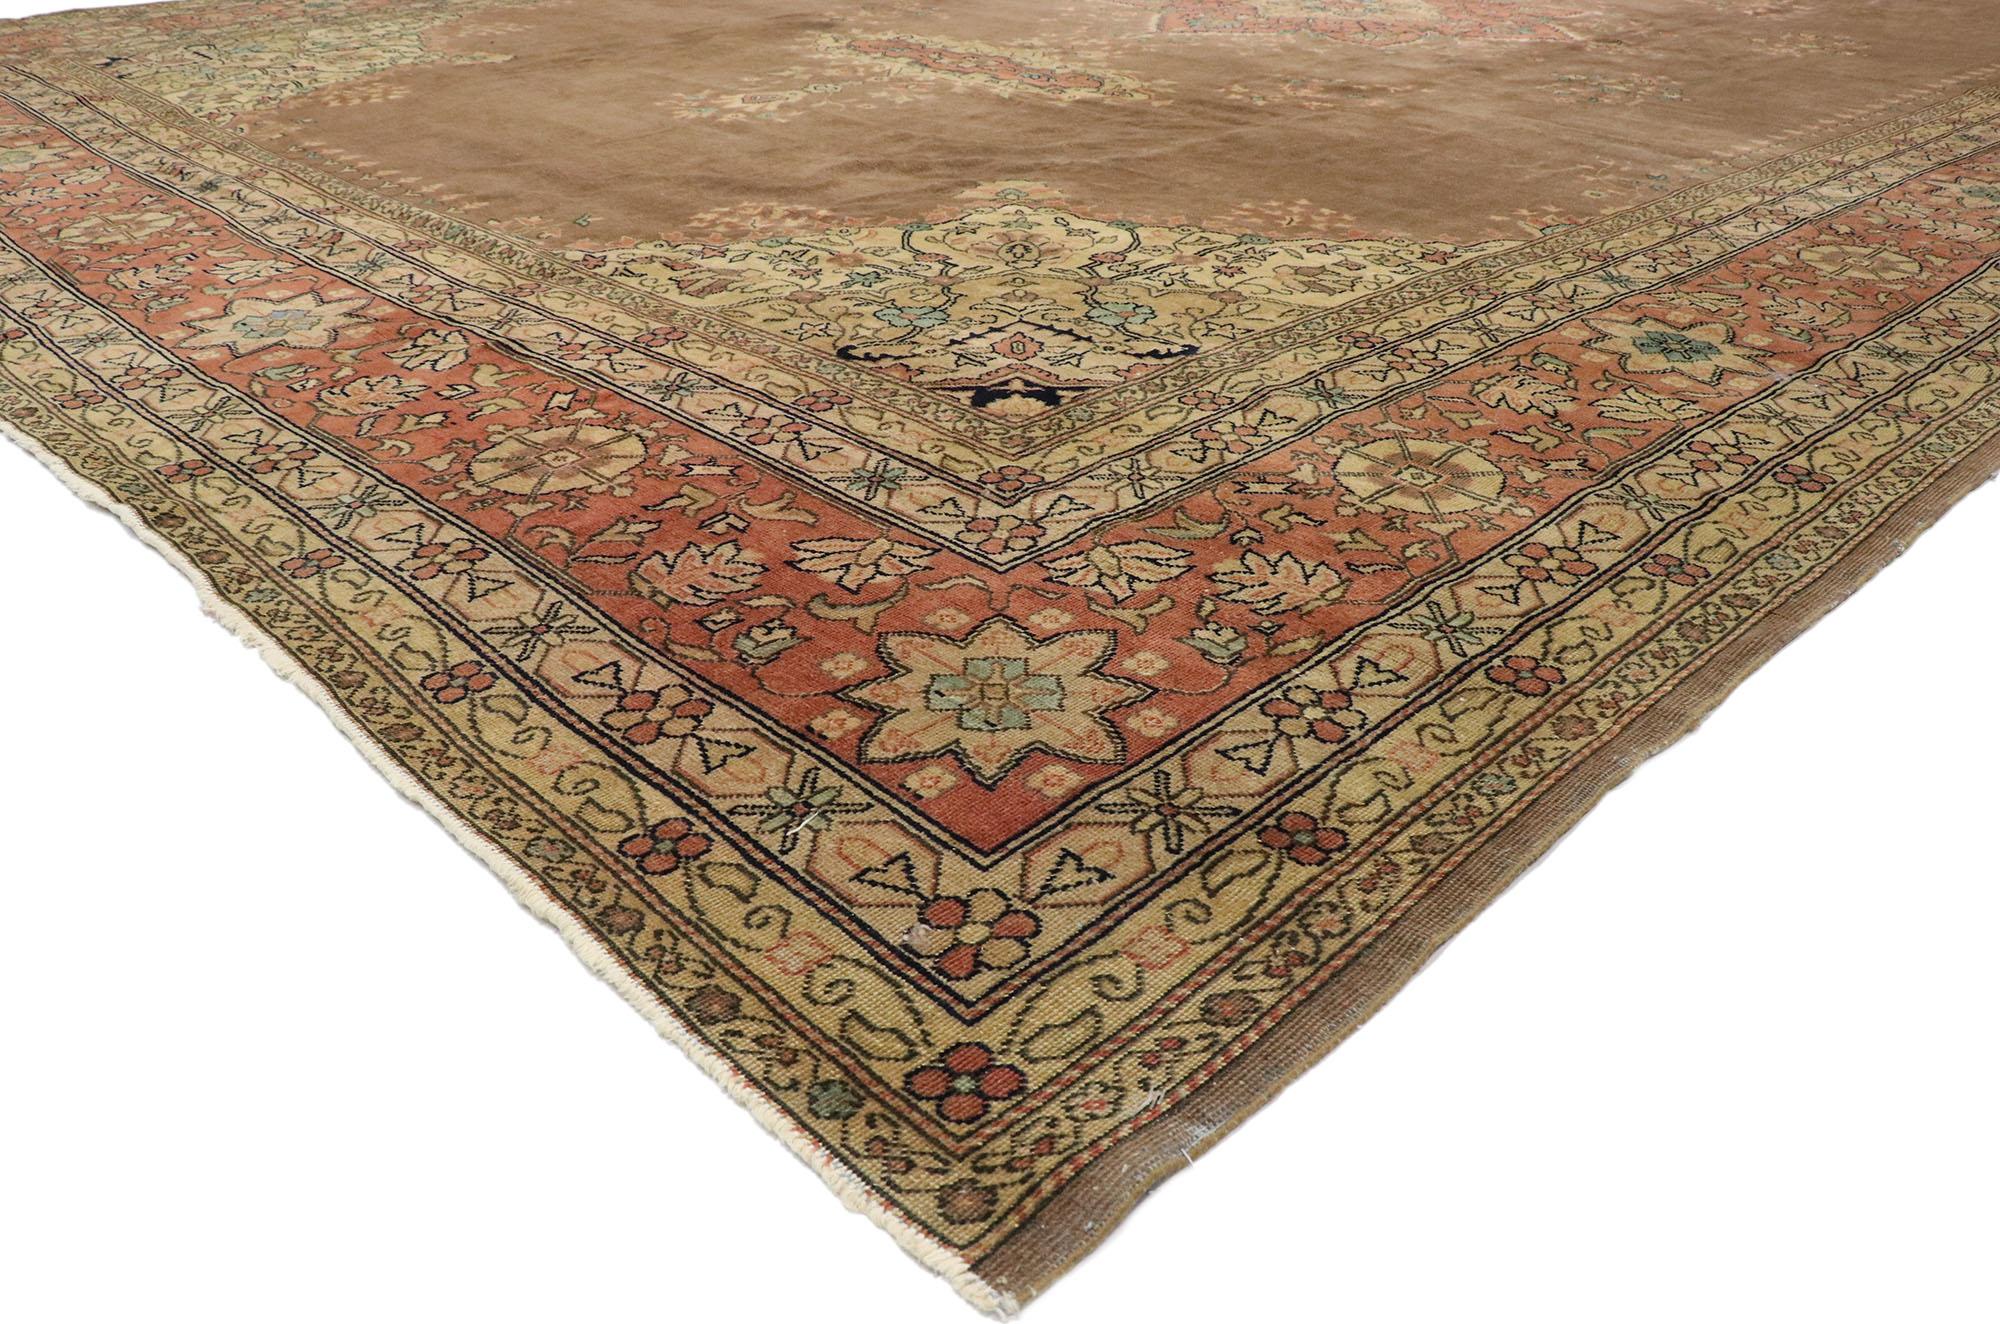 72650, antique Romanian Palace size rug with Rustic Victorian style. Warm and inviting with Old World vibes, this hand knotted wool antique Romanian palace rug beautifully embodies a rustic Victorian style. Taking center stage is a large concentric